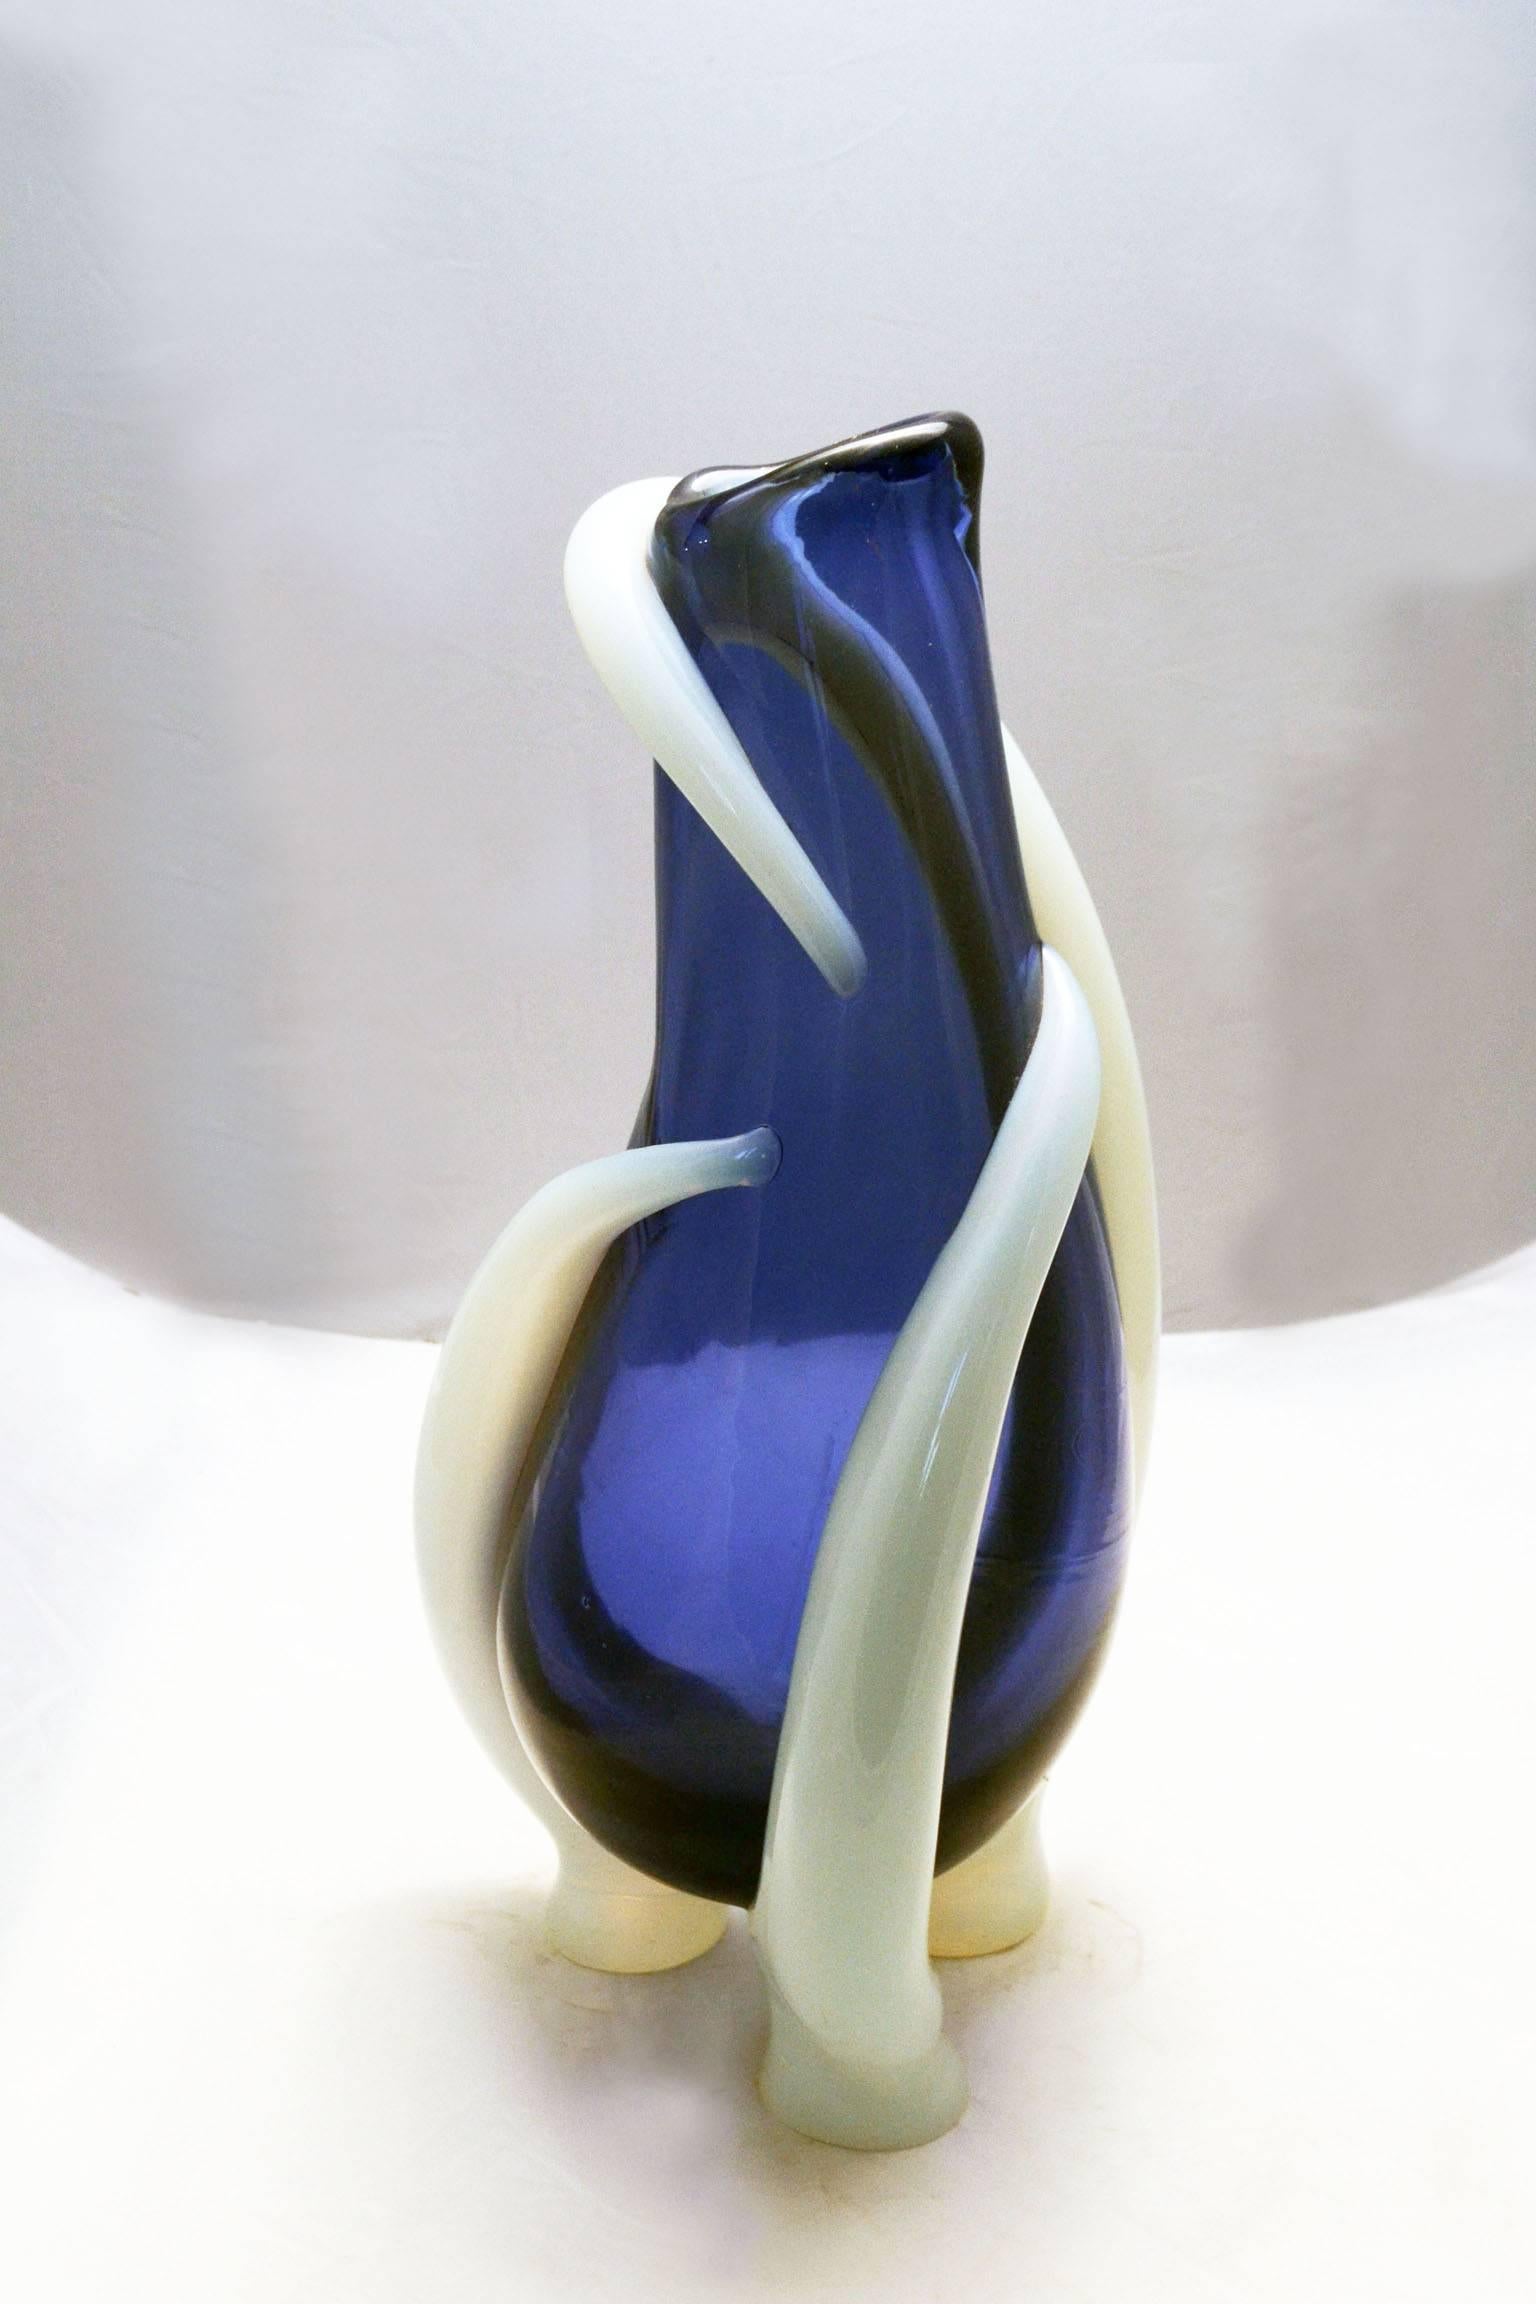 Sculpture vase designed by Claire Falkenstein for Vetrerie Salviati - Murano, in occasion of 'Biennale Vetro' in 1972.
In blue glass with hot application of oplaine glass.
Limited edition of nine pcs.
Signed and numbered on the bottom.